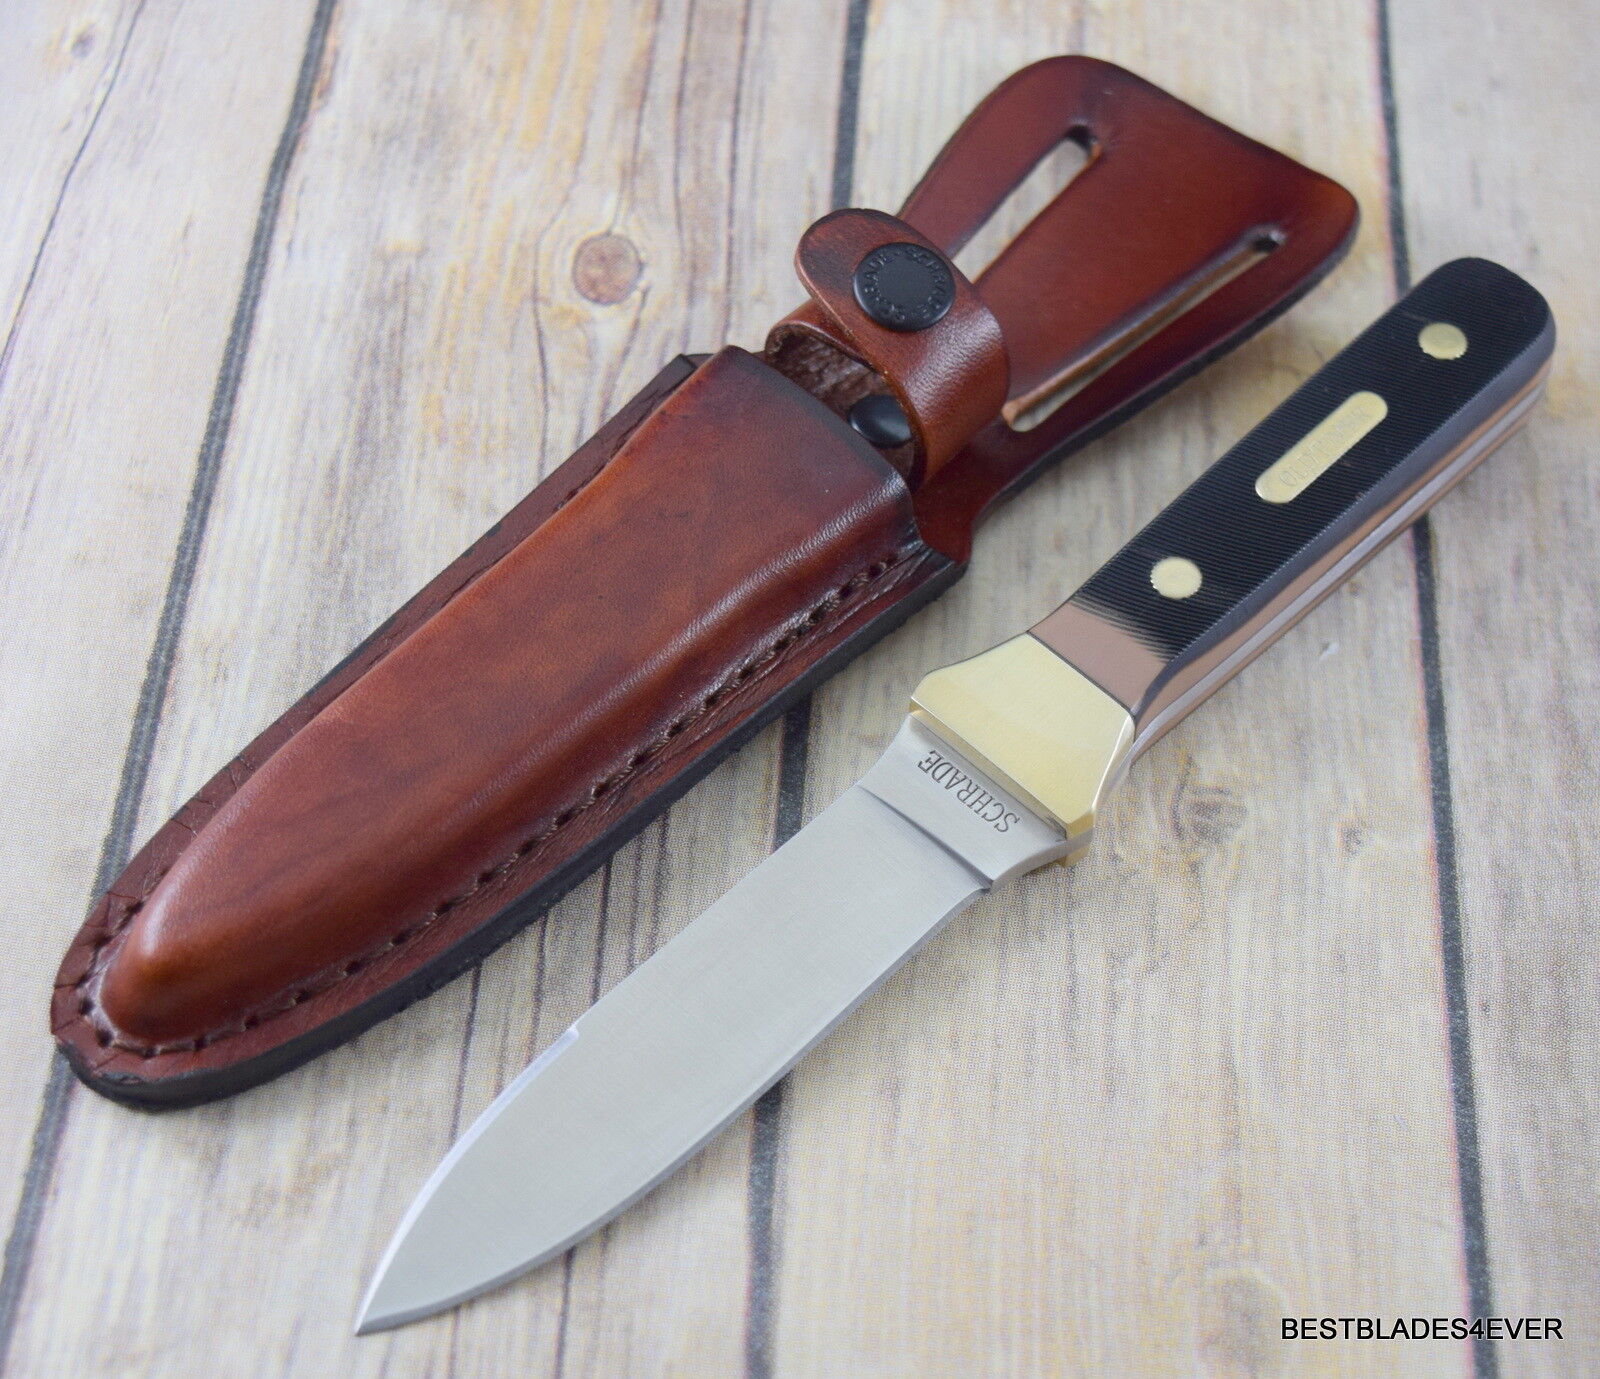 7.75 INCH SCHRADE FIXED BLADE BOOT KNIFE SINGLE EDGE WITH LEATHER SHEATH